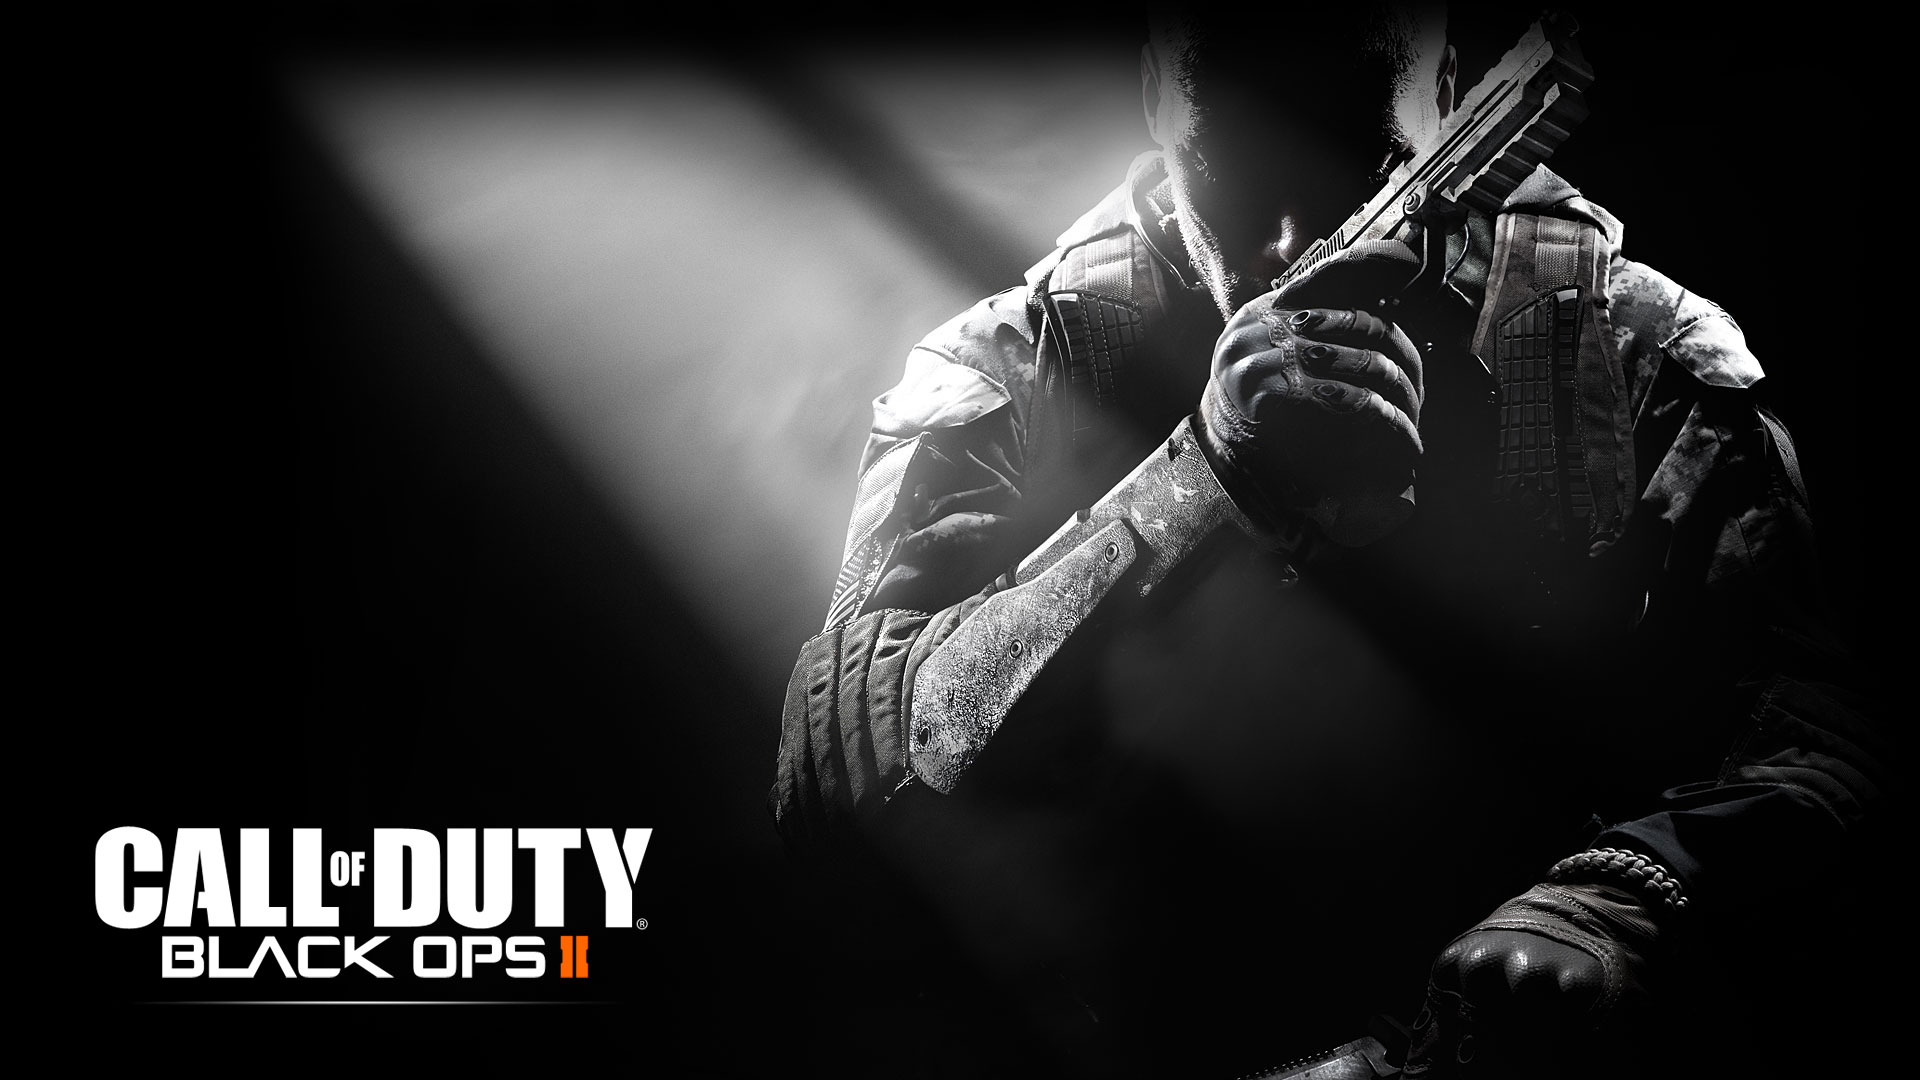 Black Ops 2 Wallpapers in HD Page 3